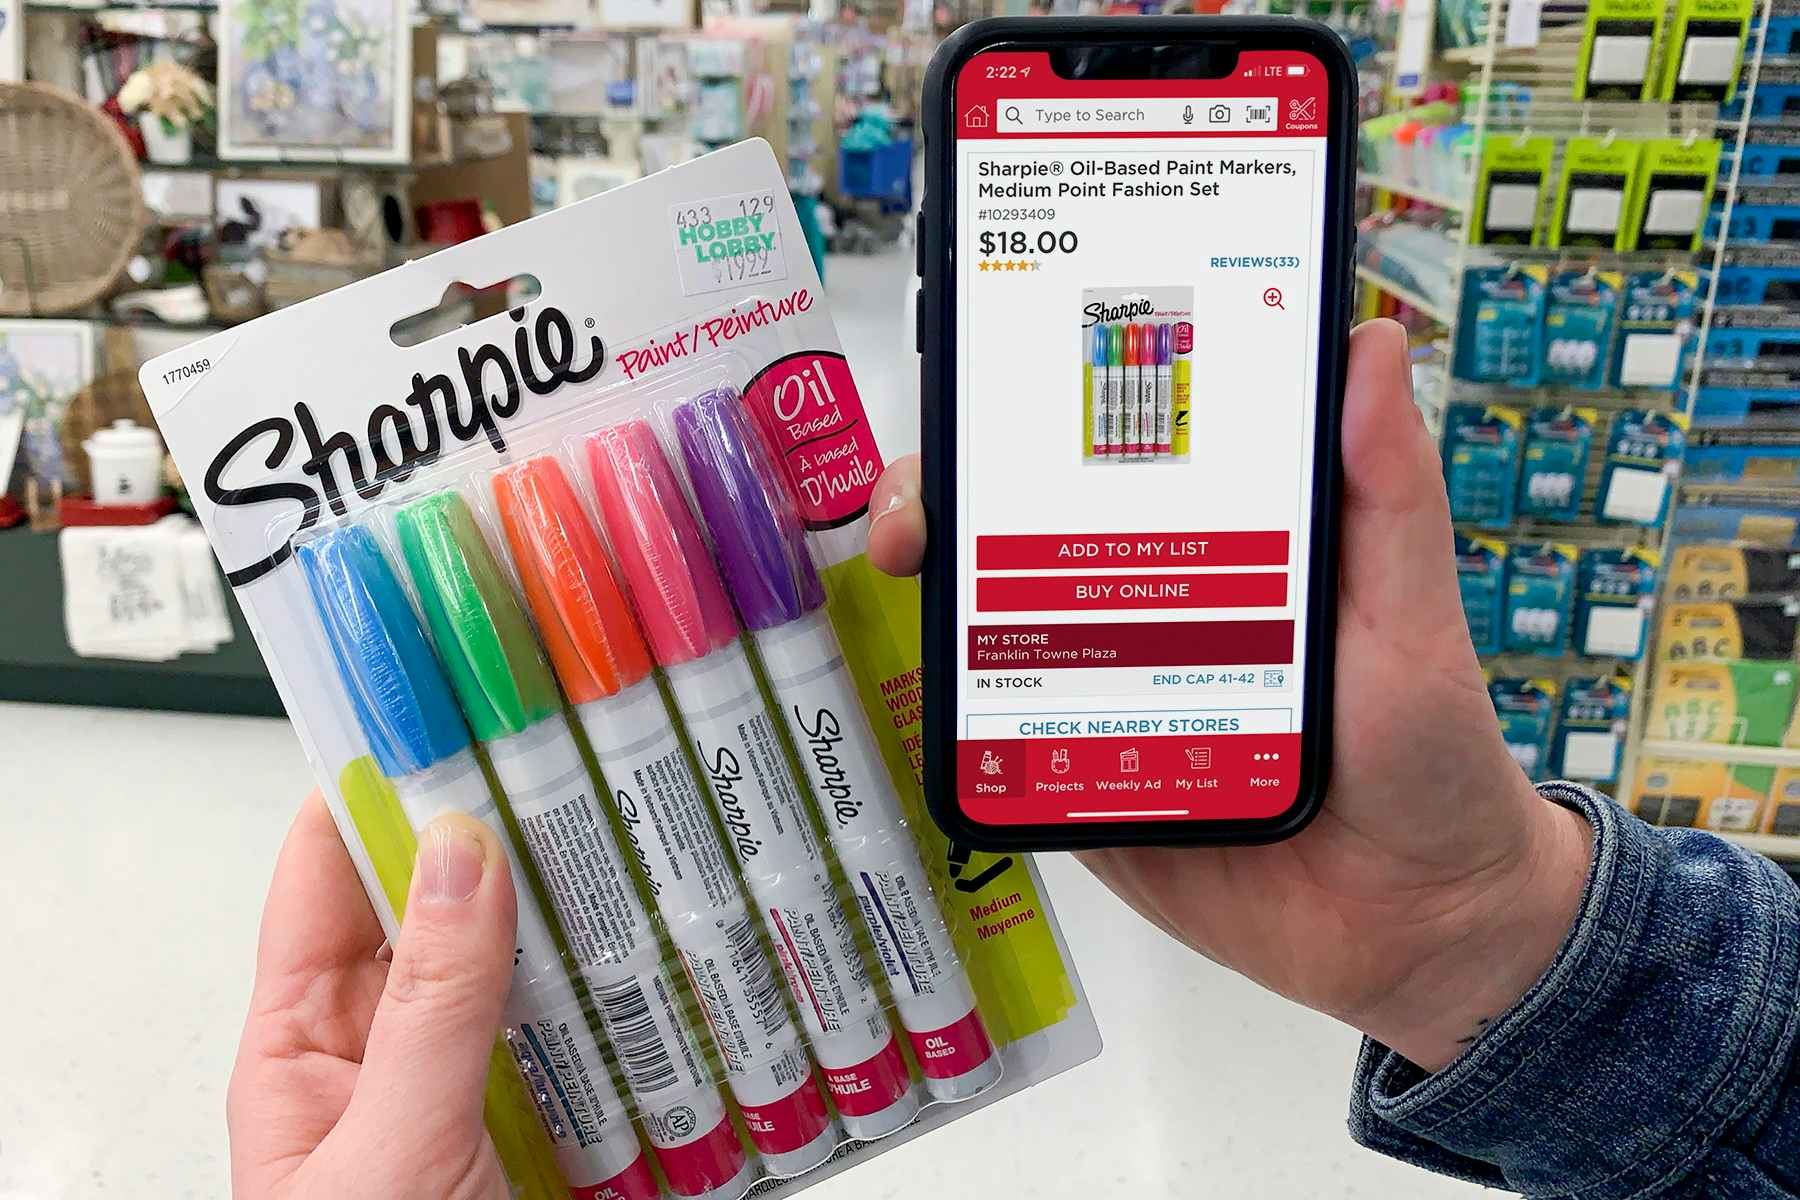 A cell phone showing the price of Sharpie Paint pens at Michaels with a pack of the same paint pens, featuring a higher price at Hobby Lobby.